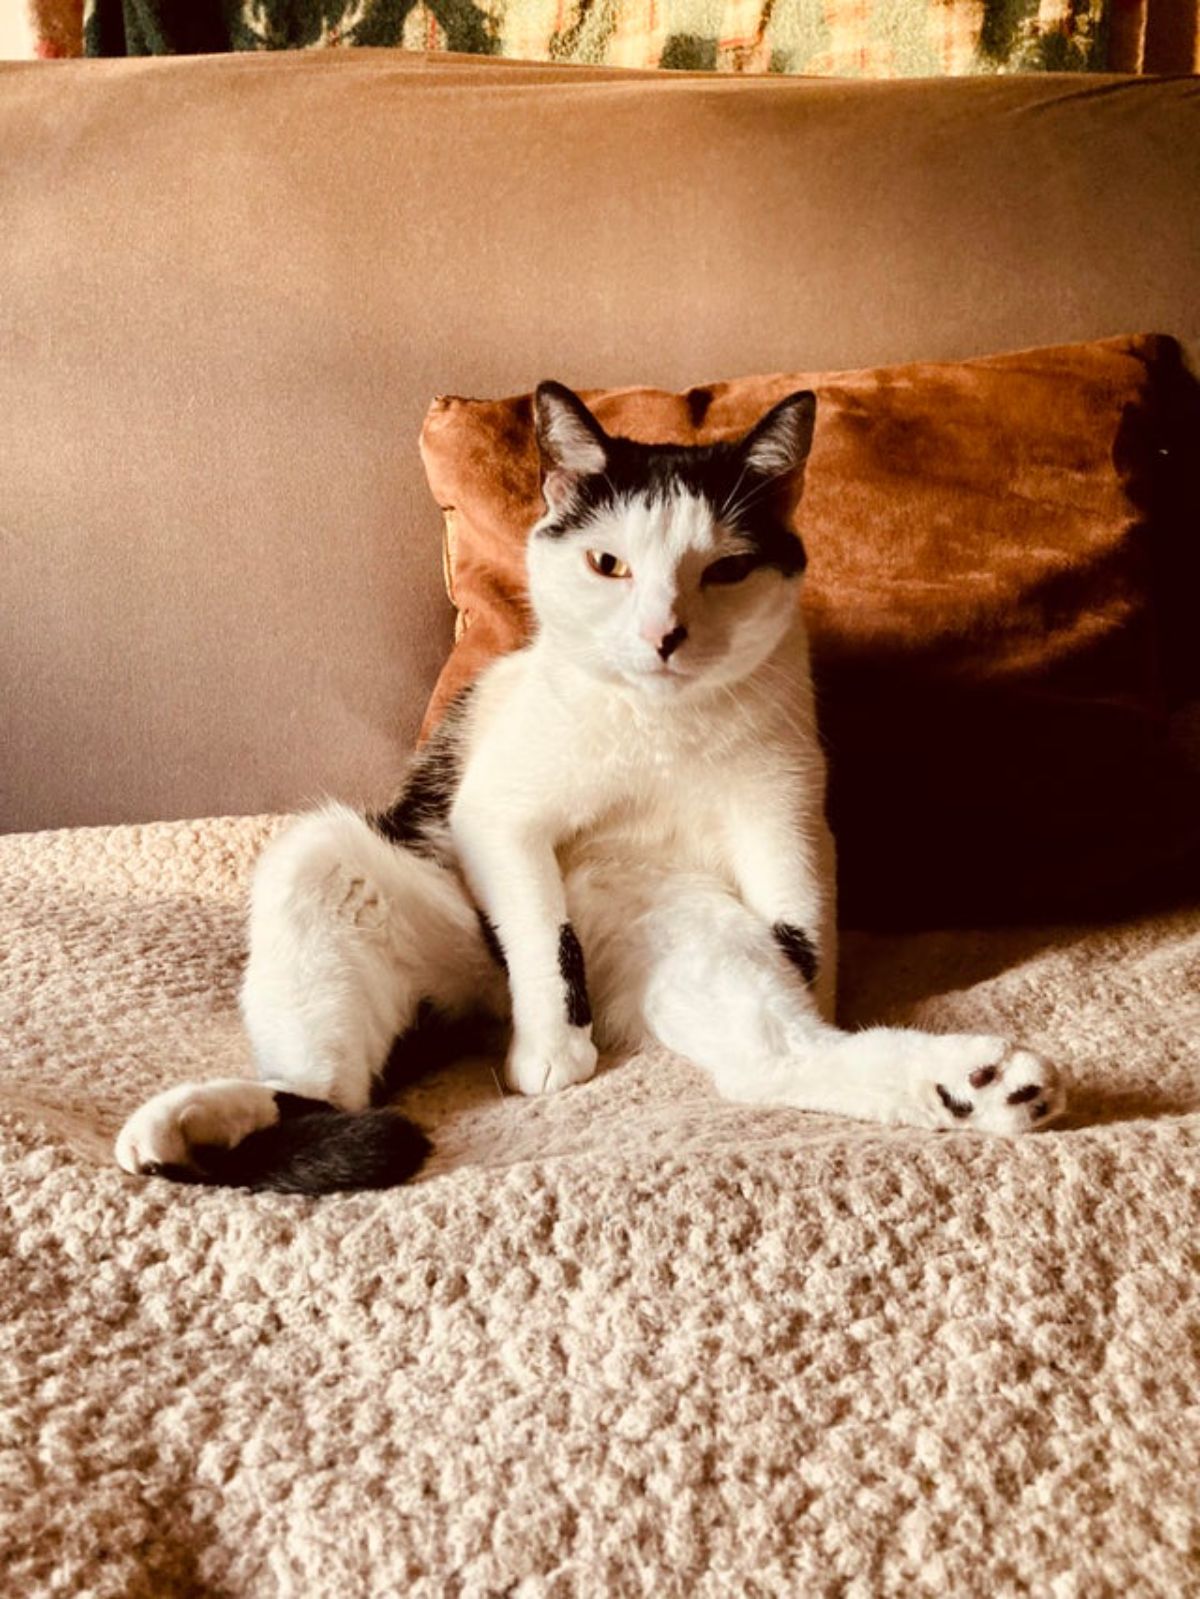 black and white cat sitting on a brown bed with the back legs splayed out in front and one front leg placed between them